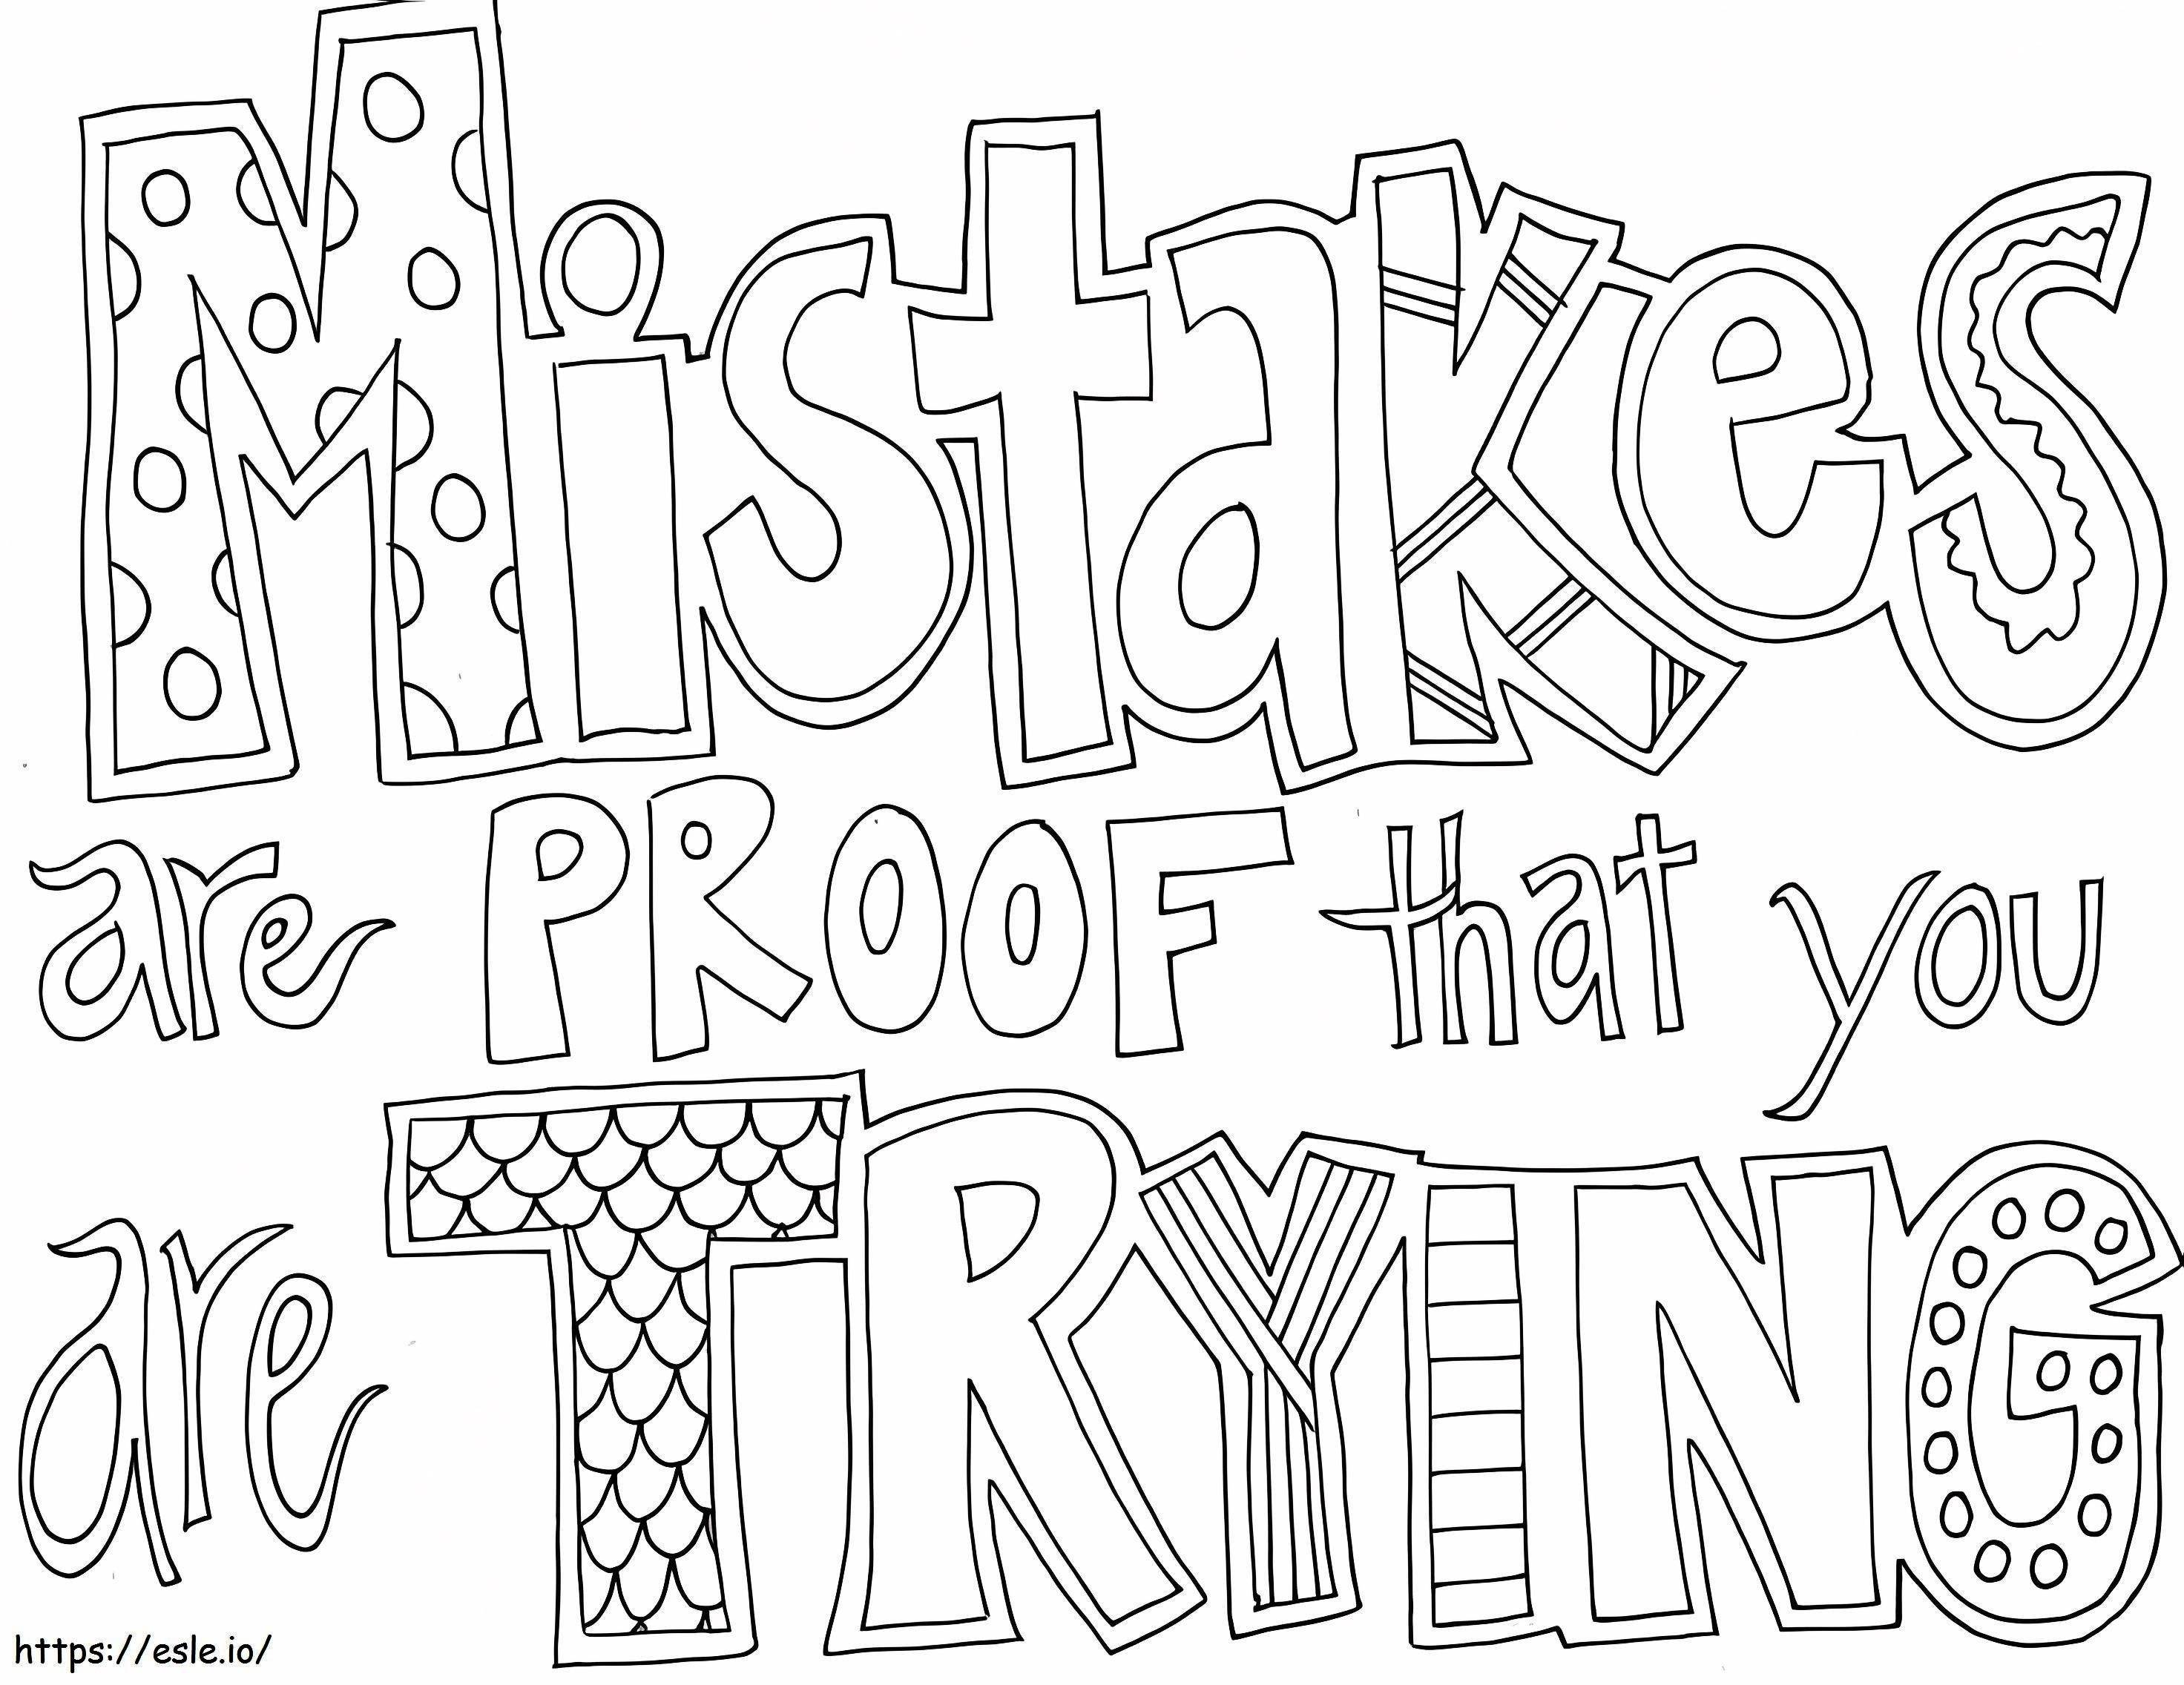 Doodle Art Positive Quote coloring page